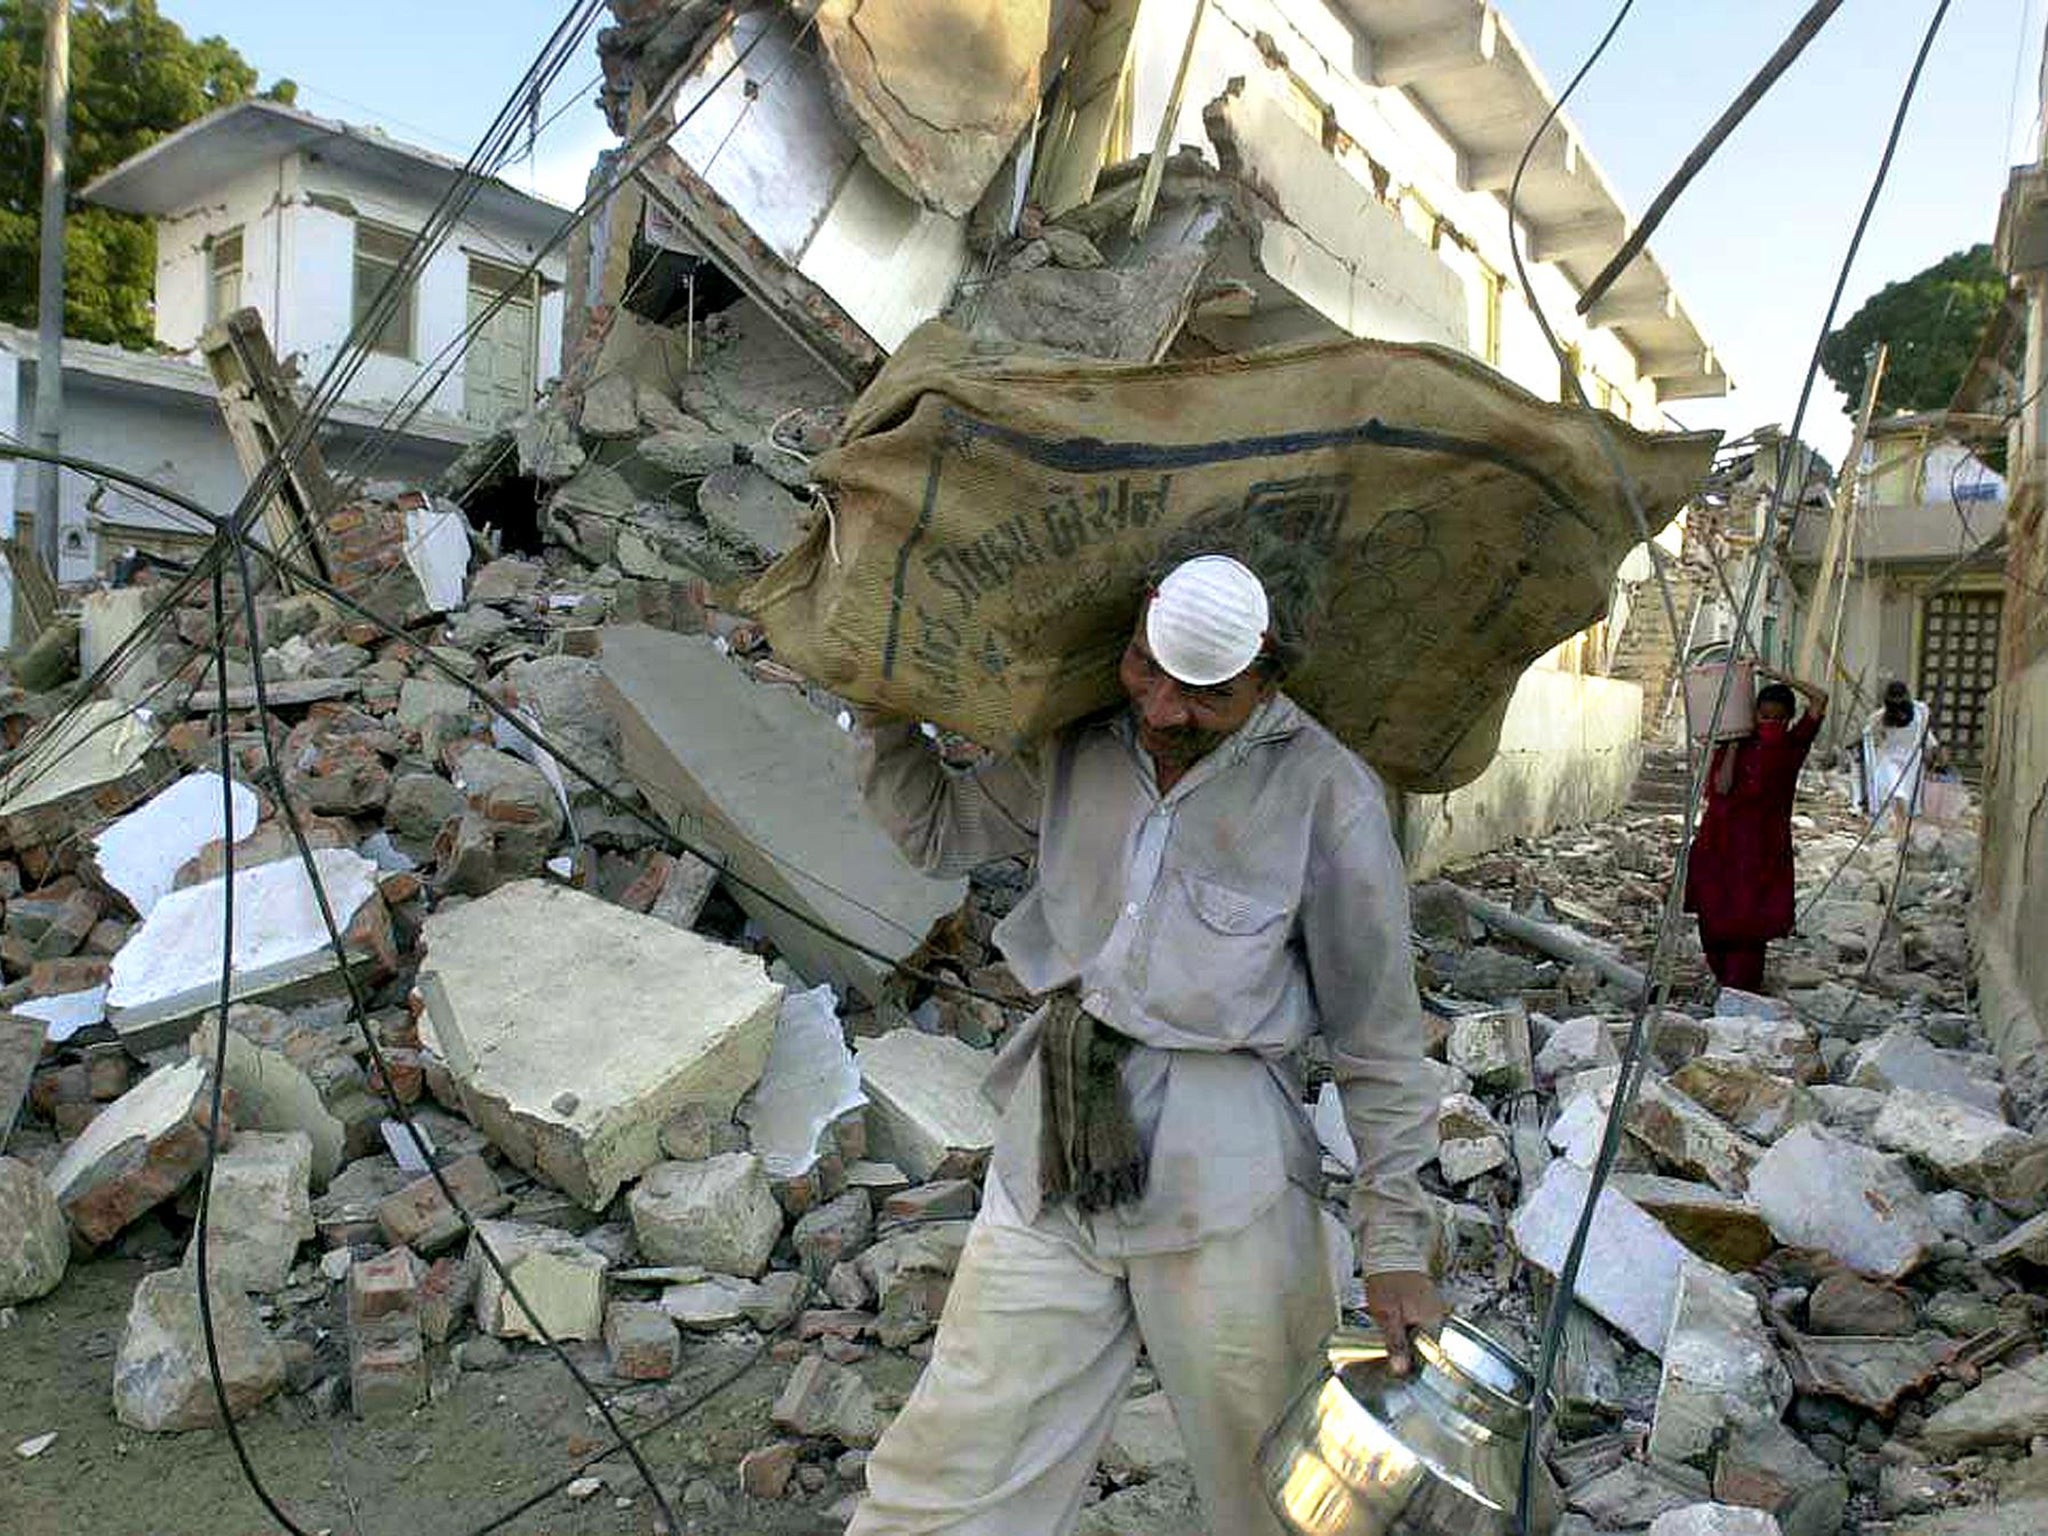 A worker carries the belongings of a resident, retrieved from the earthquake rubble earlier, through the streets of Bhachau, January 2001